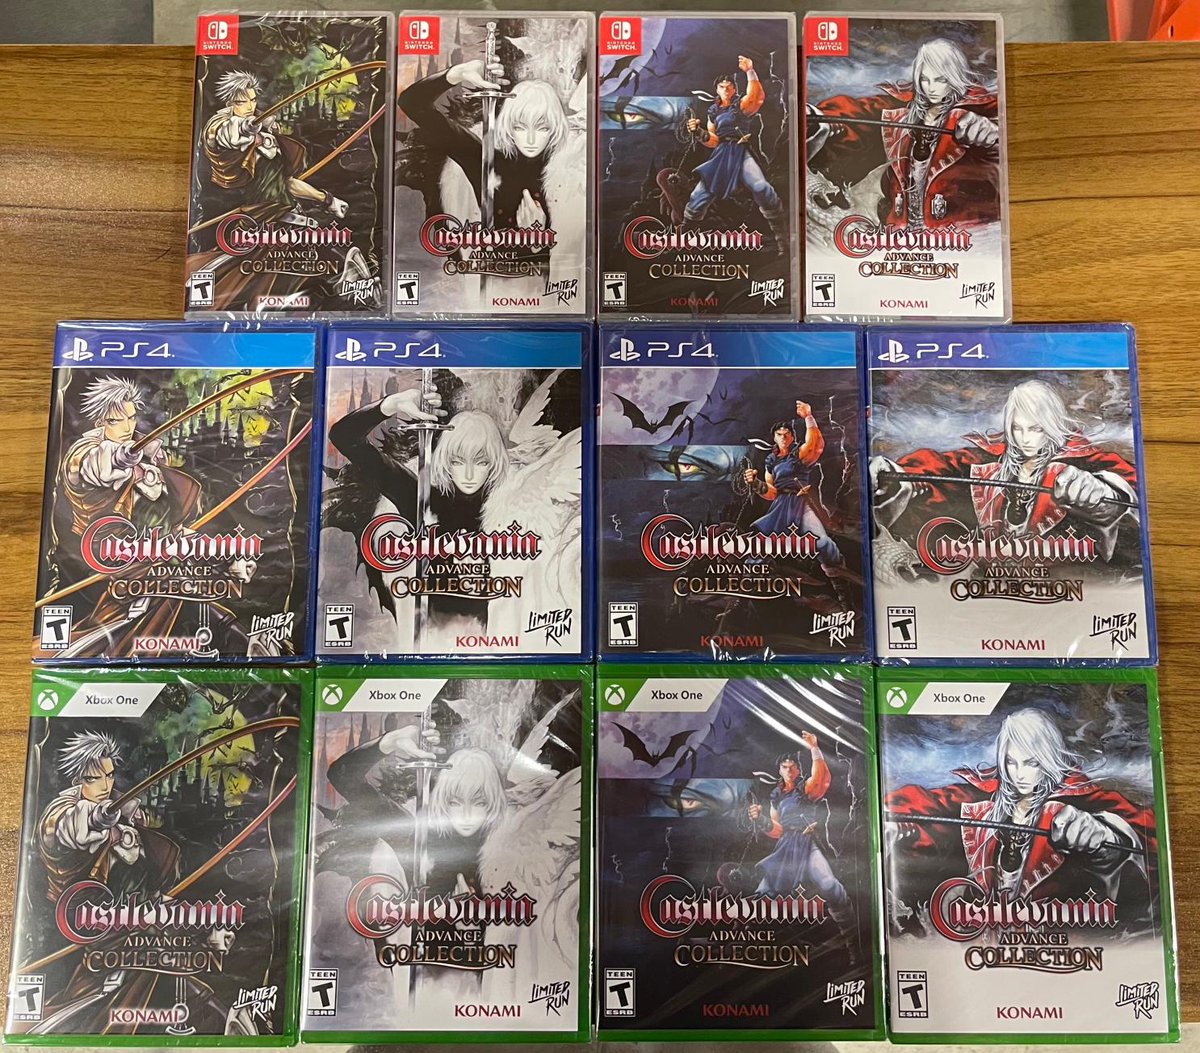 🚨Our last #giveaway this week! 🚨 RT this post and follow #VGP for a chance to win four copies, one of each variant of the #Castlevania Advance Collection! Winner's choice #NSW, #XboxSeriesX or #PS4 The winner chosen Monday, April 15th at 11 a.m. EST…